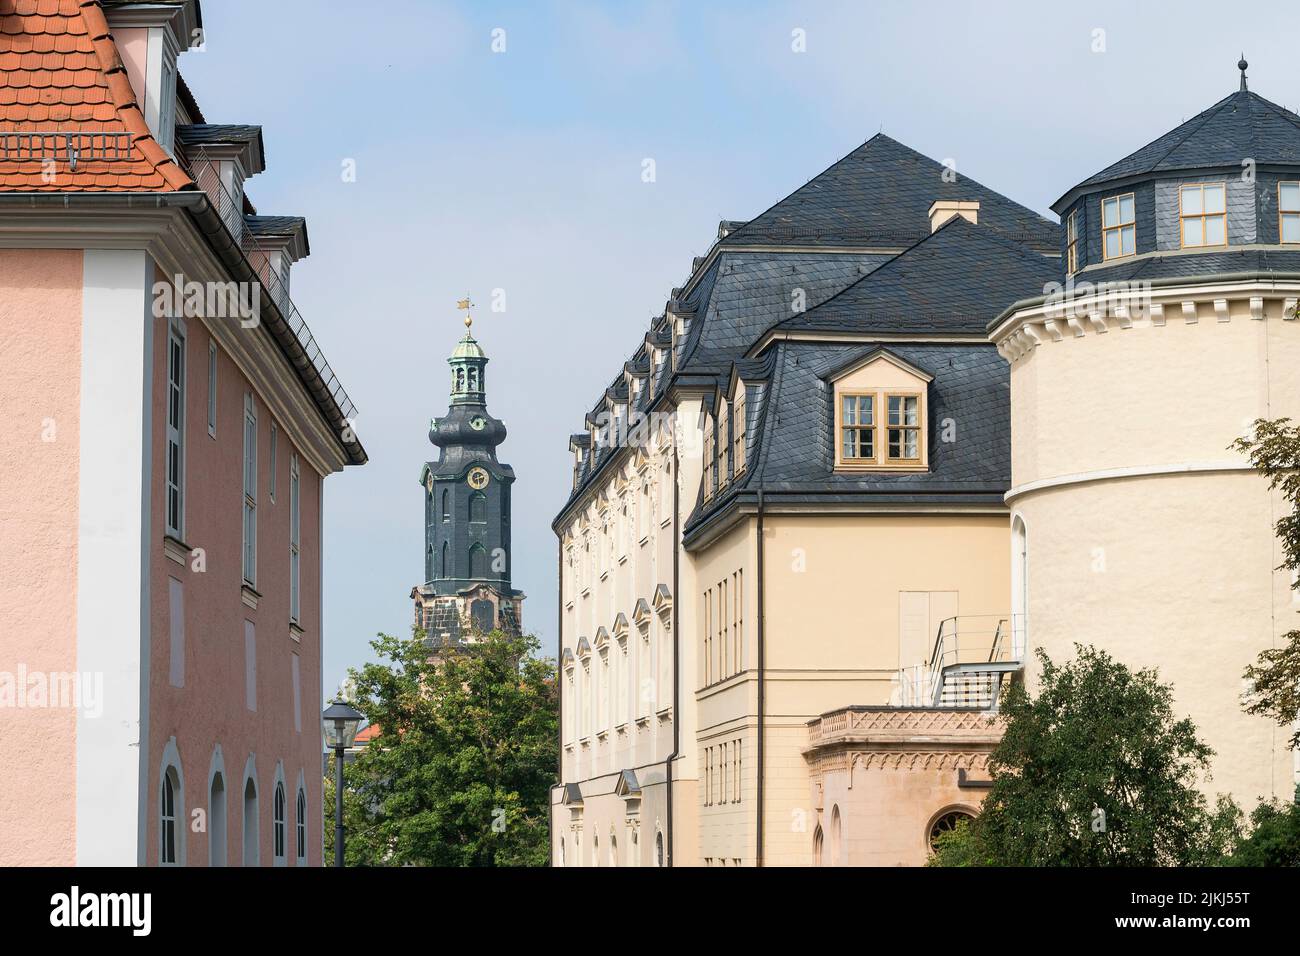 Weimar, Thuringia, left house of Frau von Stein, right Duchess Anna Amalia Library, view to castle tower Stock Photo